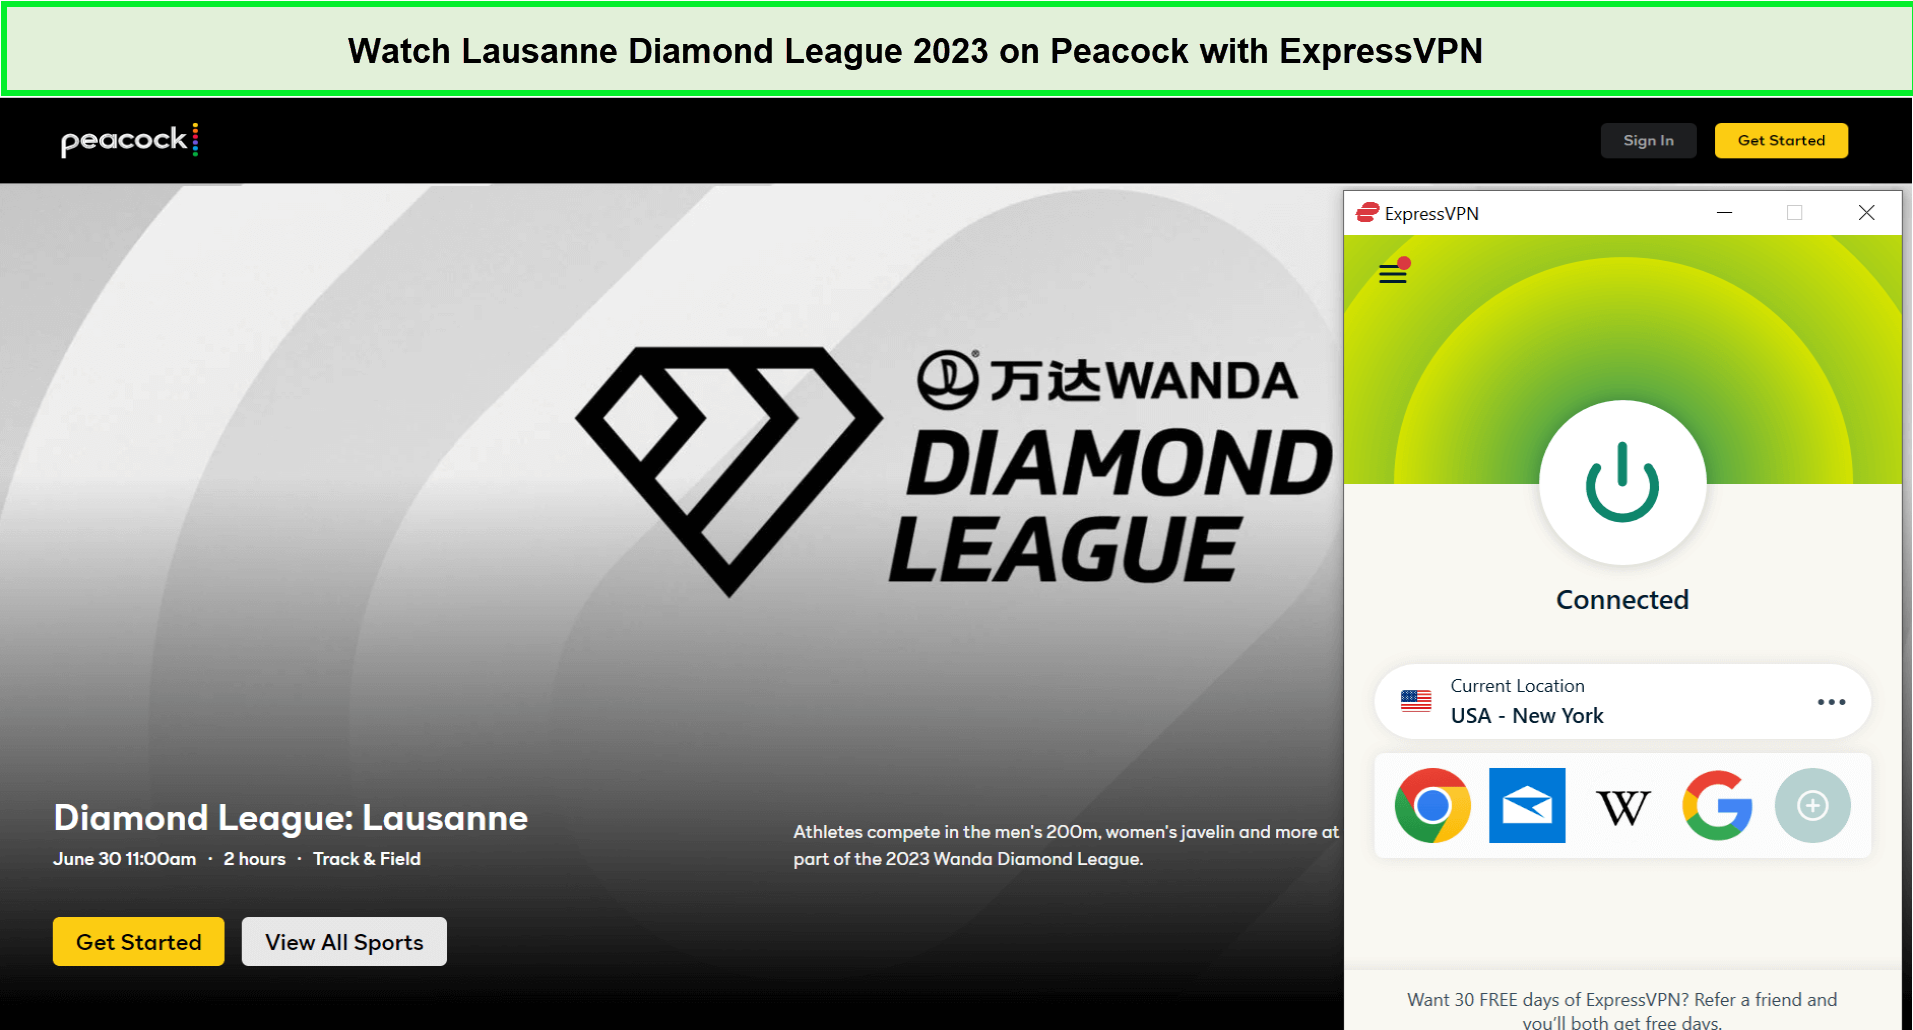 Watch-Lausanne-Diamond-League-2023-in-UAE-on-Peacock-with-ExpressVPN